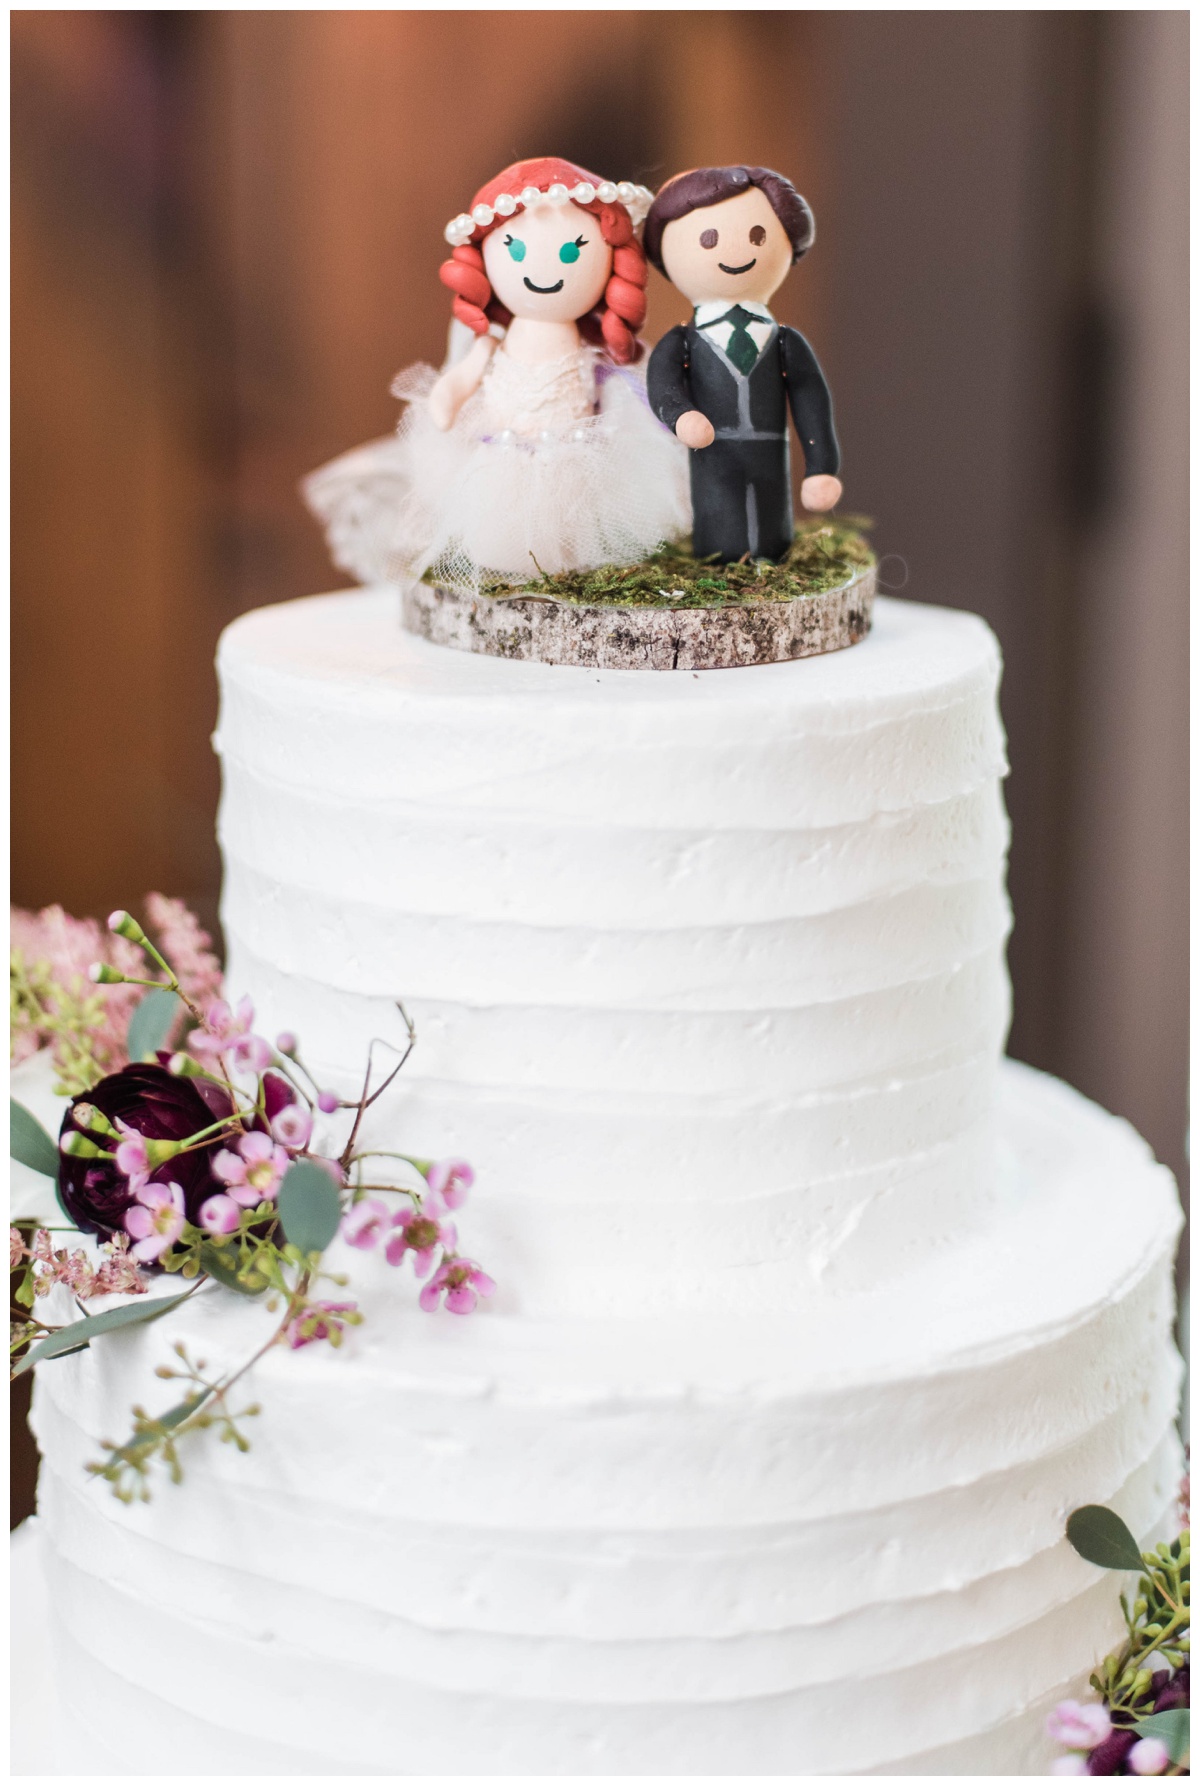 Whimsical Woodland Fall Wedding at mountain memories at thorpewood in thurmont maryland in october by sarah & dave photography richmond wedding photographer woodland forest inspired wedding cake three tiered photo inspiration 